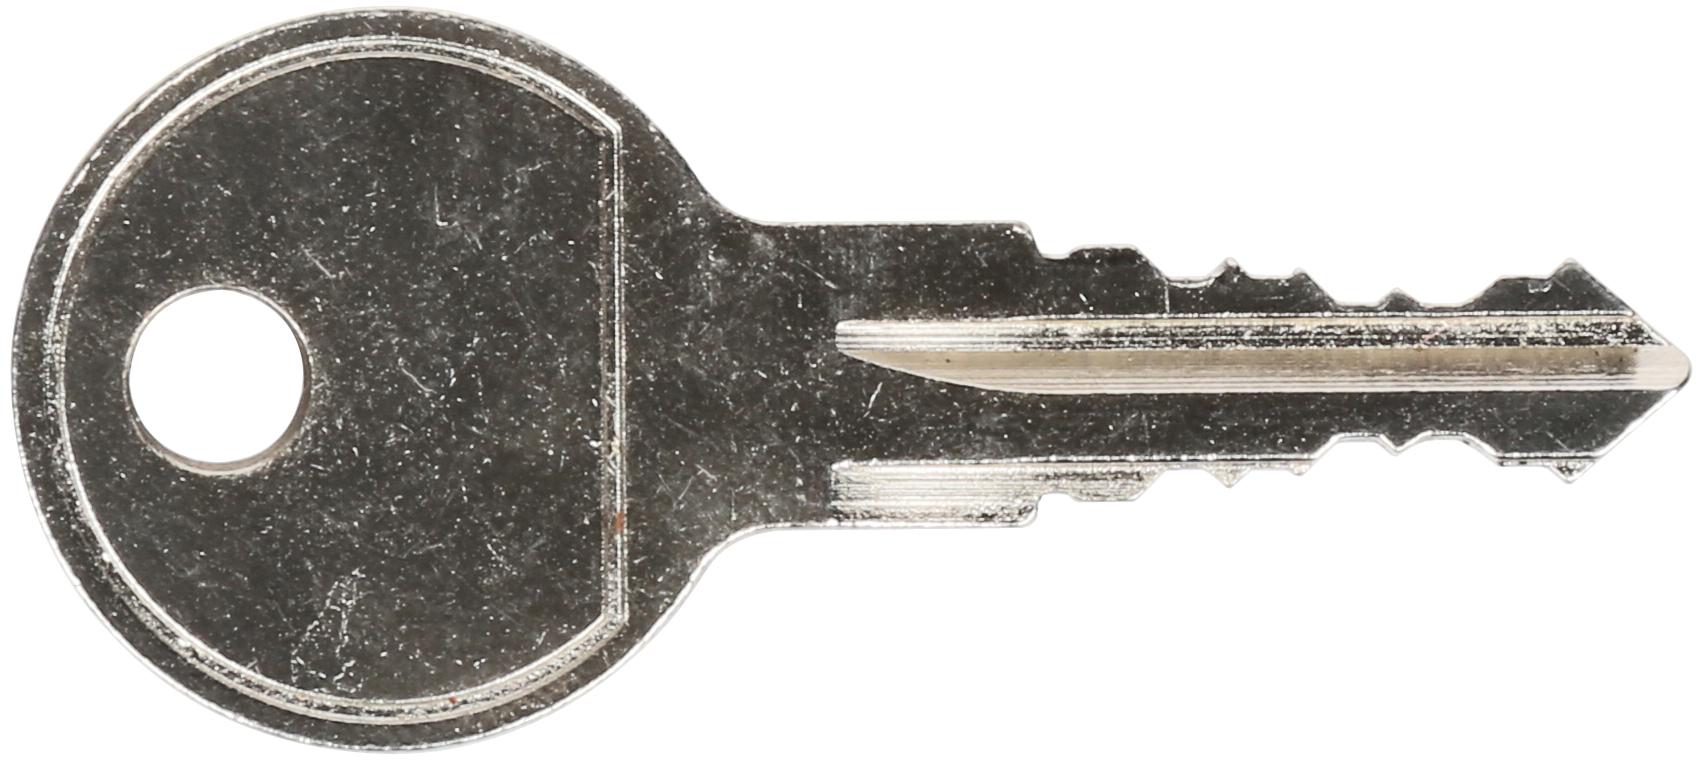 Spare Roof Box Key 025